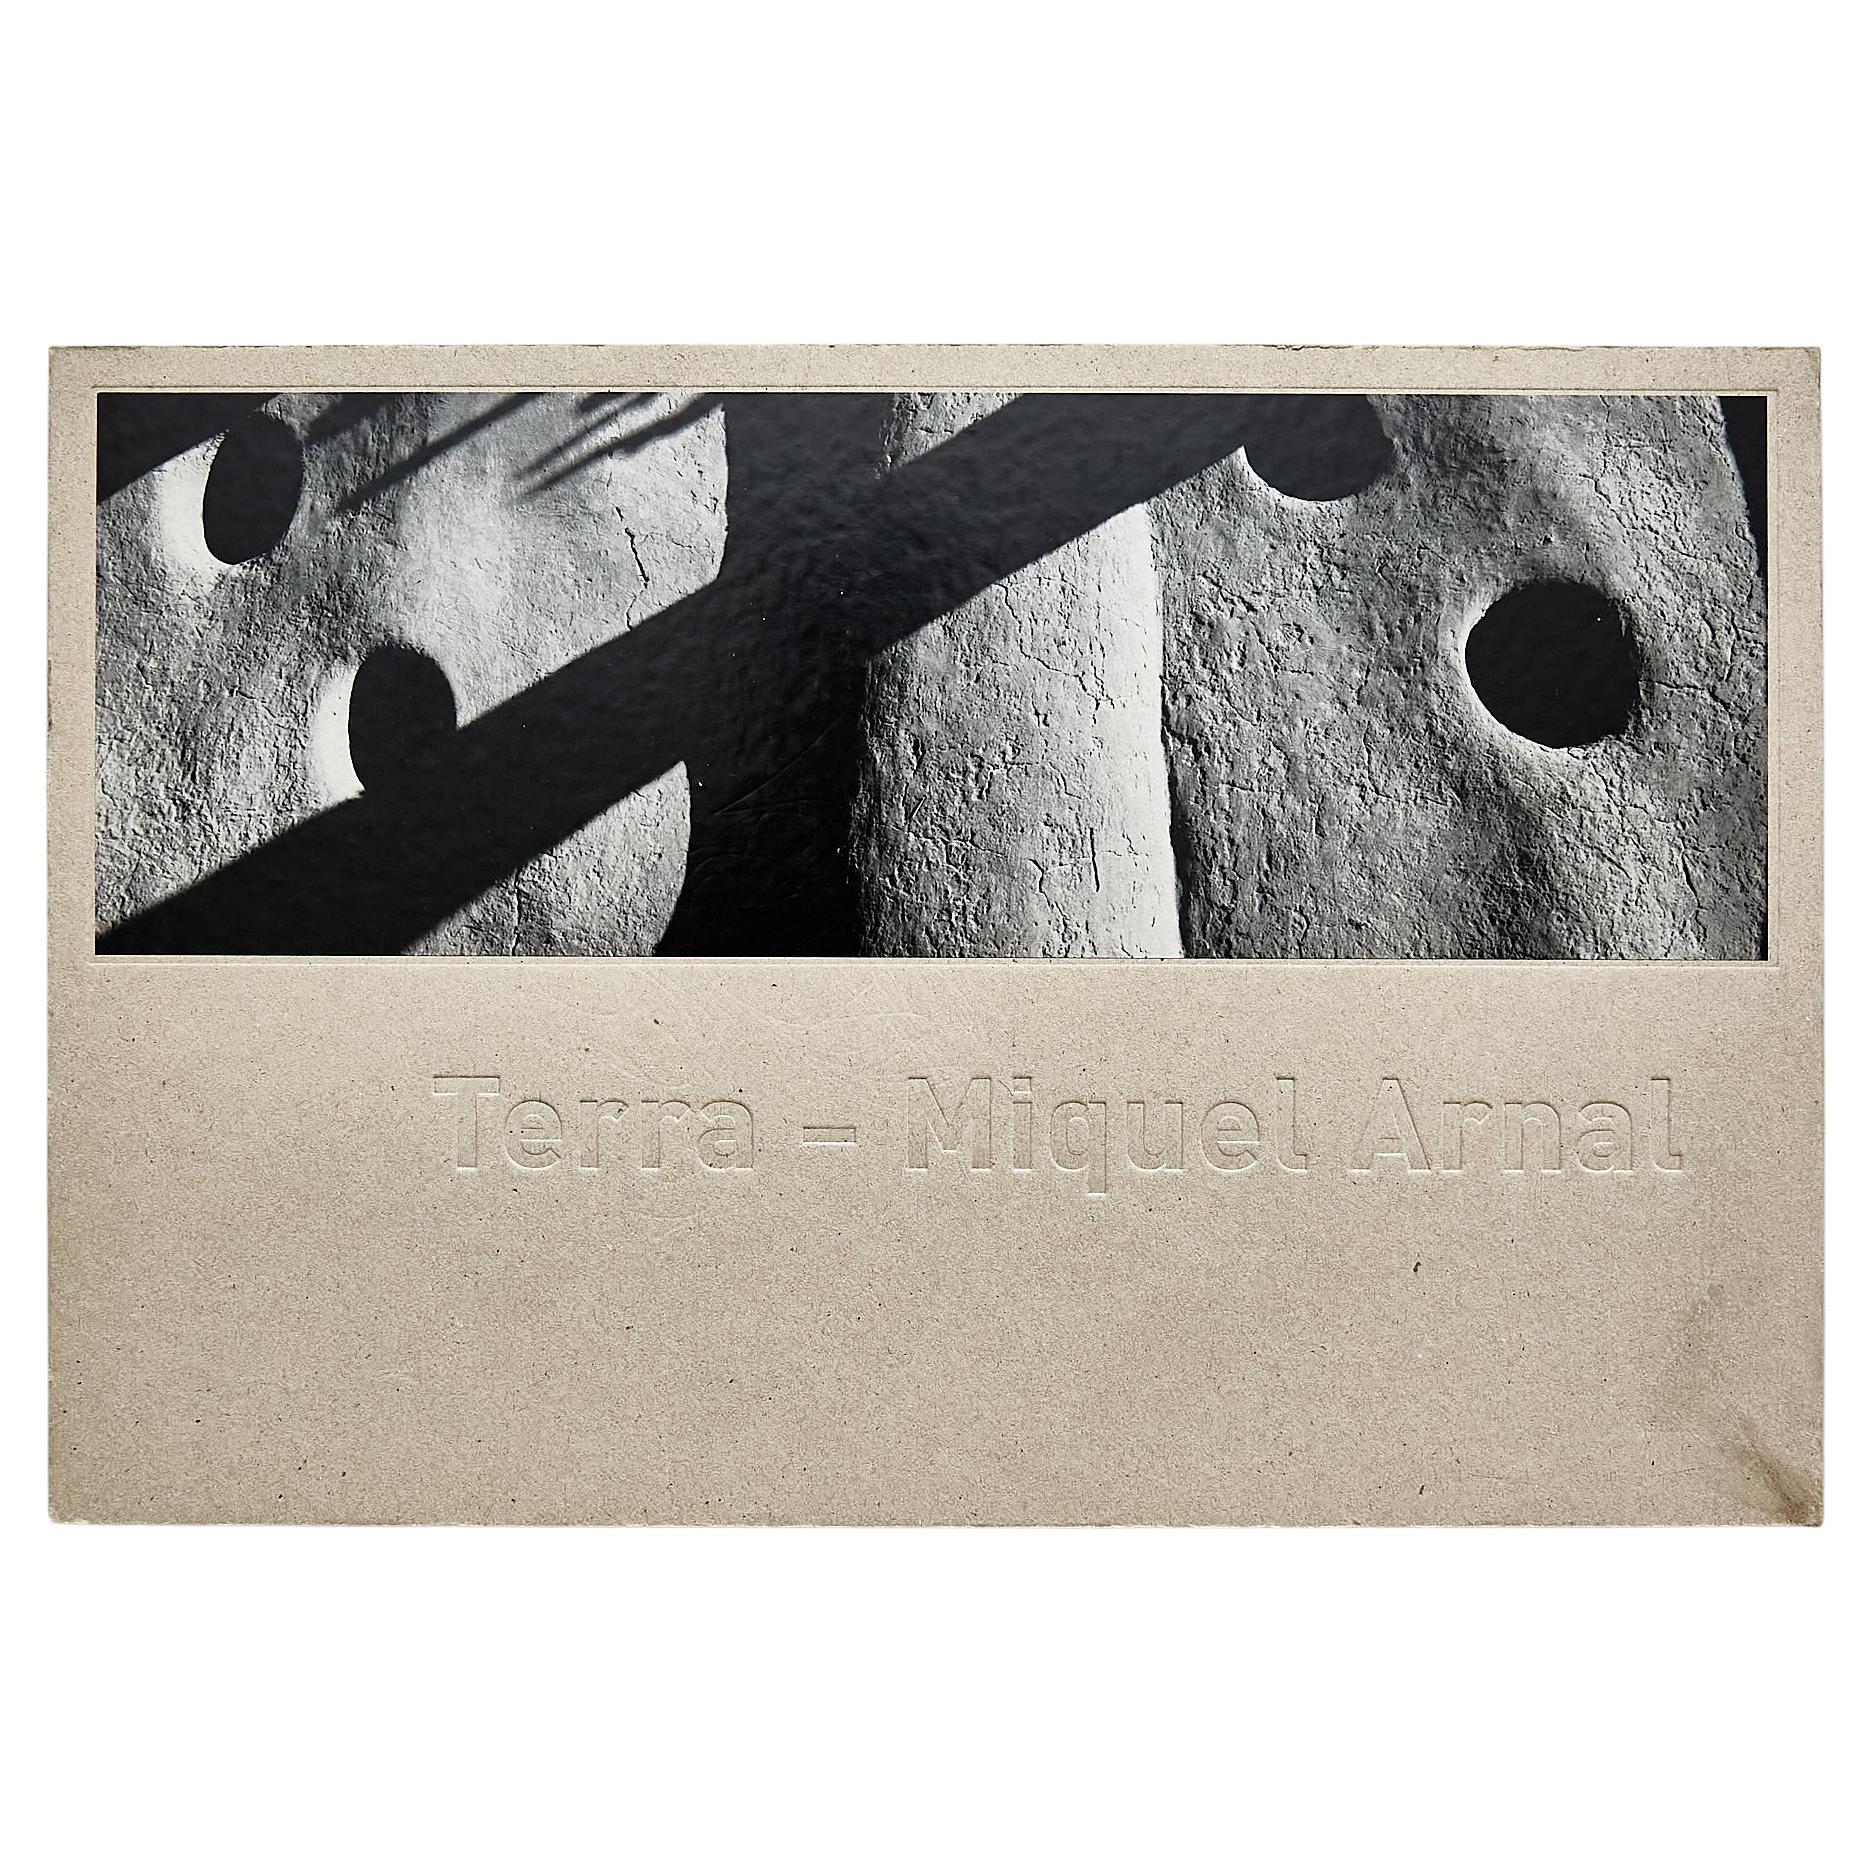 Terra: Miquel Arnal's Stunning Photo Book For Sale